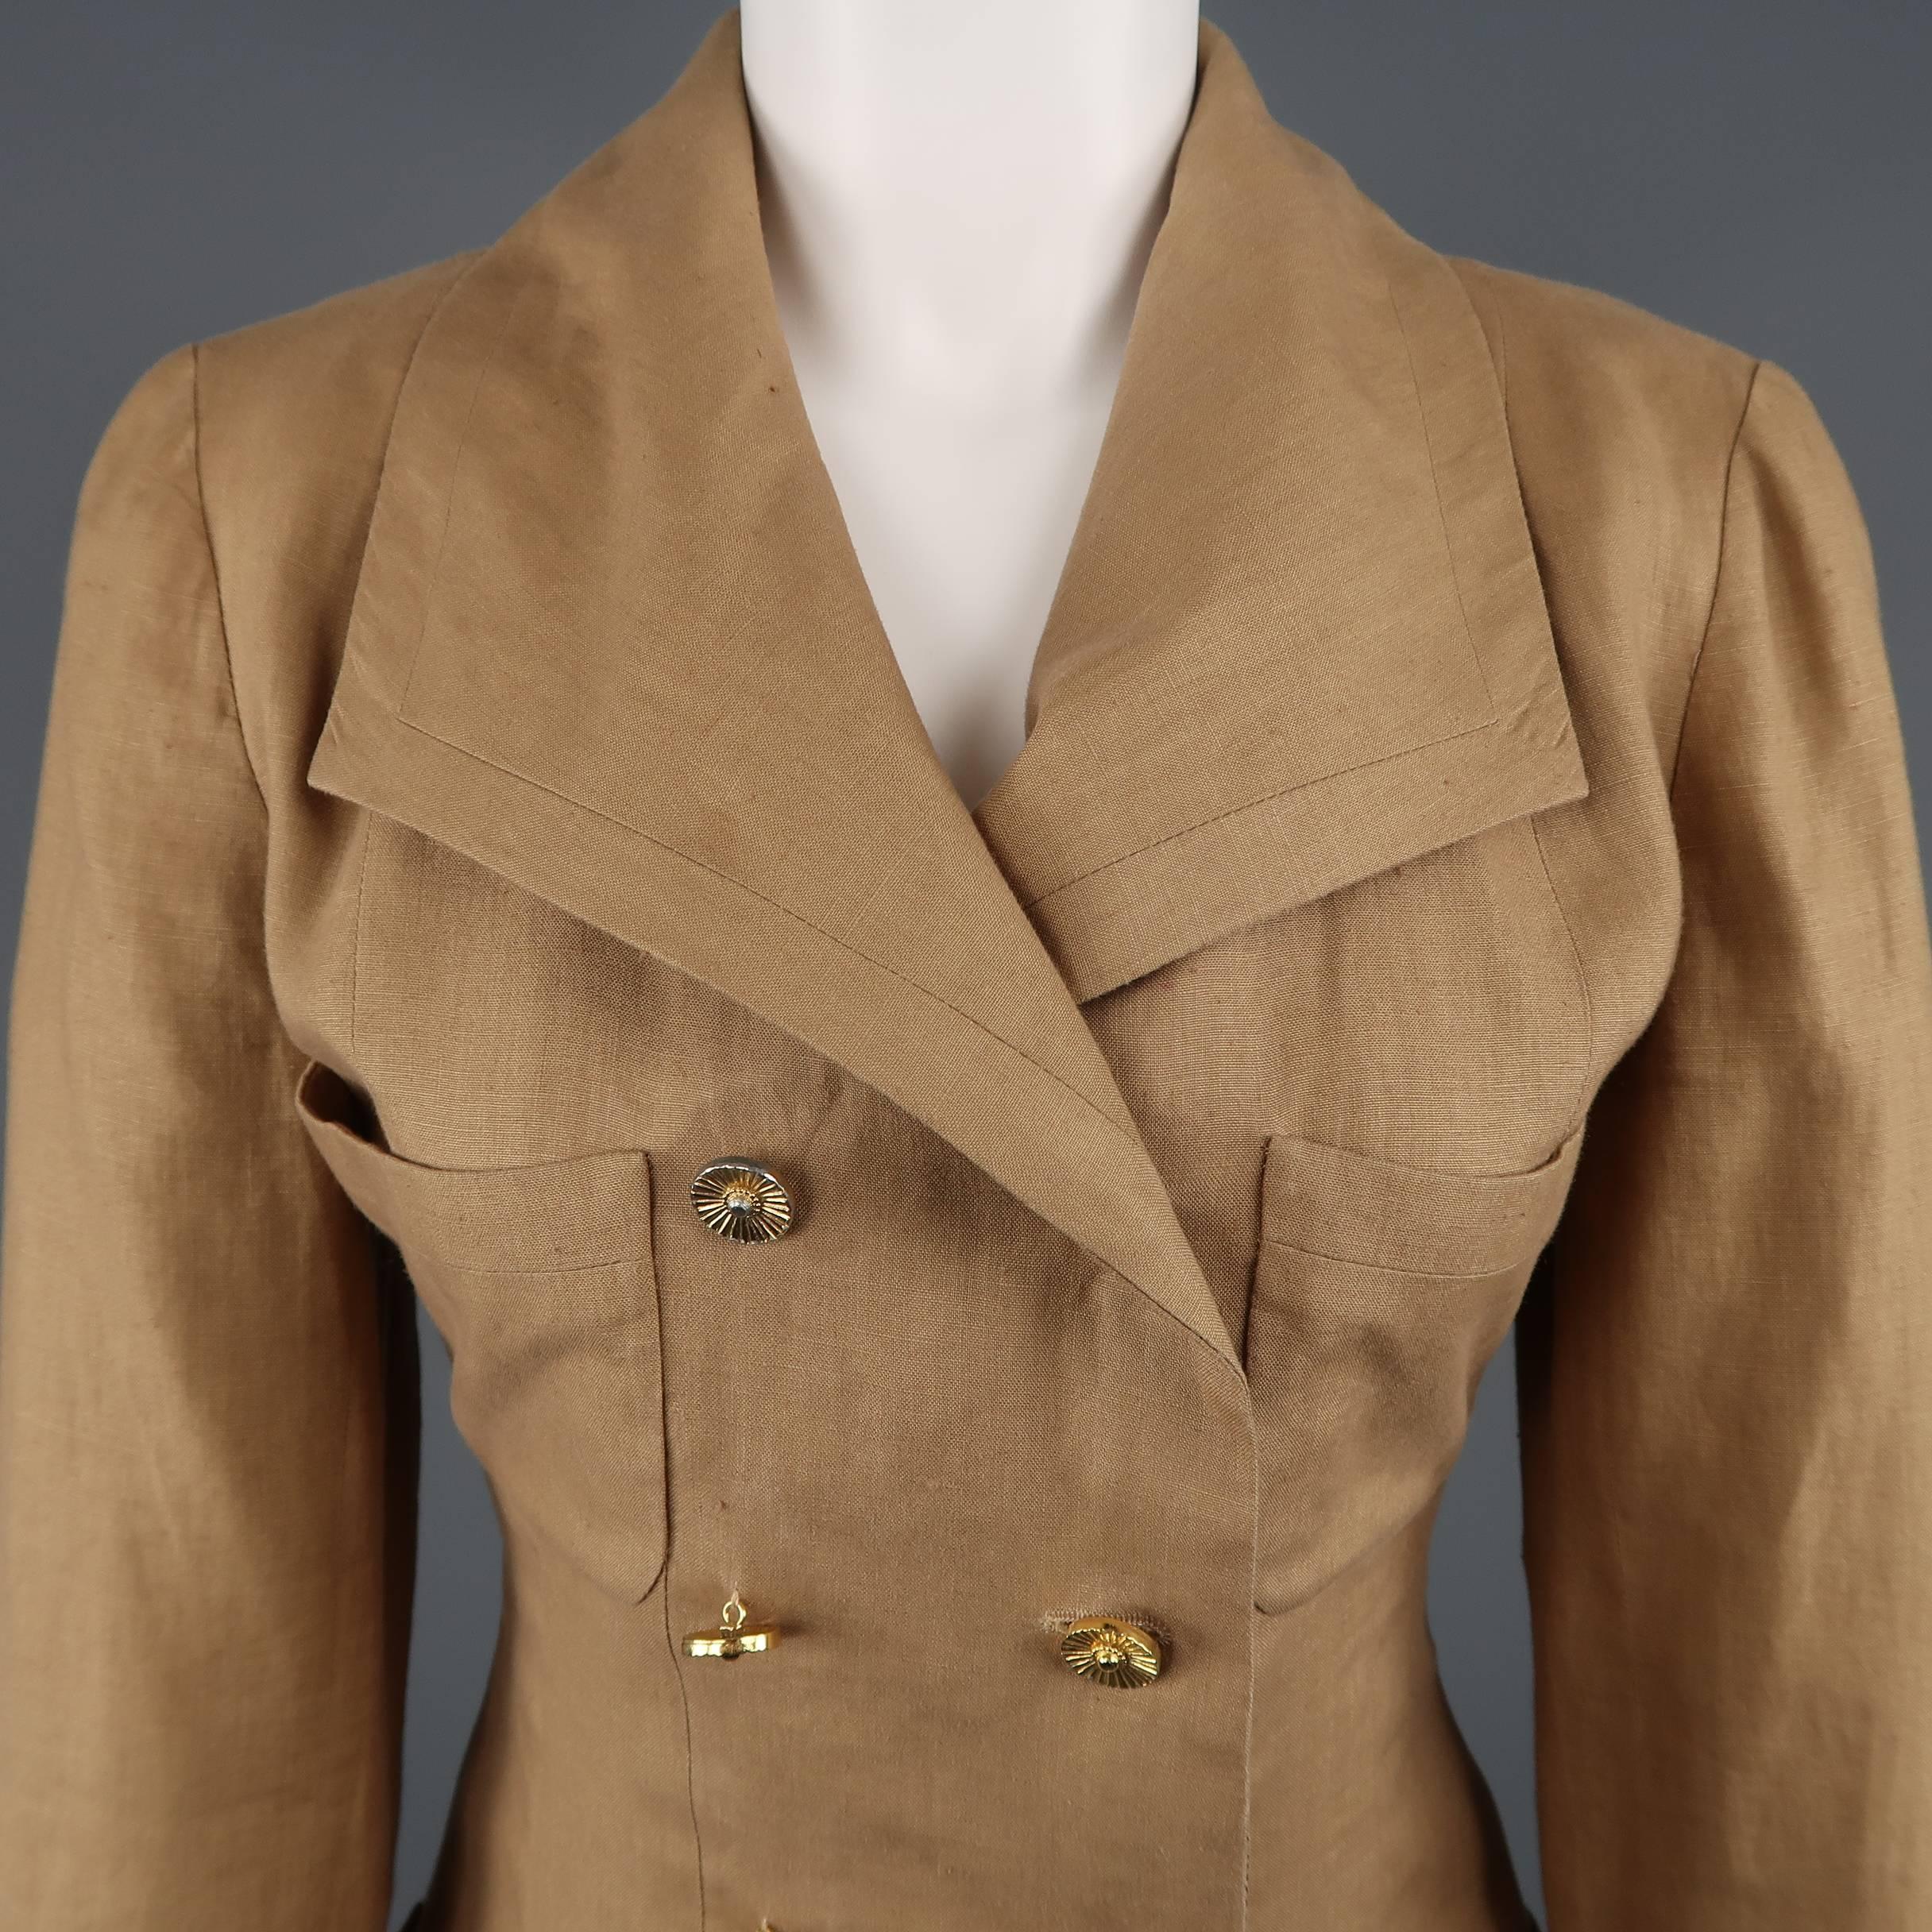 Vintage CHANEL circa 1990 suit comes in tan linen and includes a double breasted jacket with pointed lapel, four patch pockets, and gold tone metal buttons with a matching button side skirt. Wear throughout including stain on inner lapel and